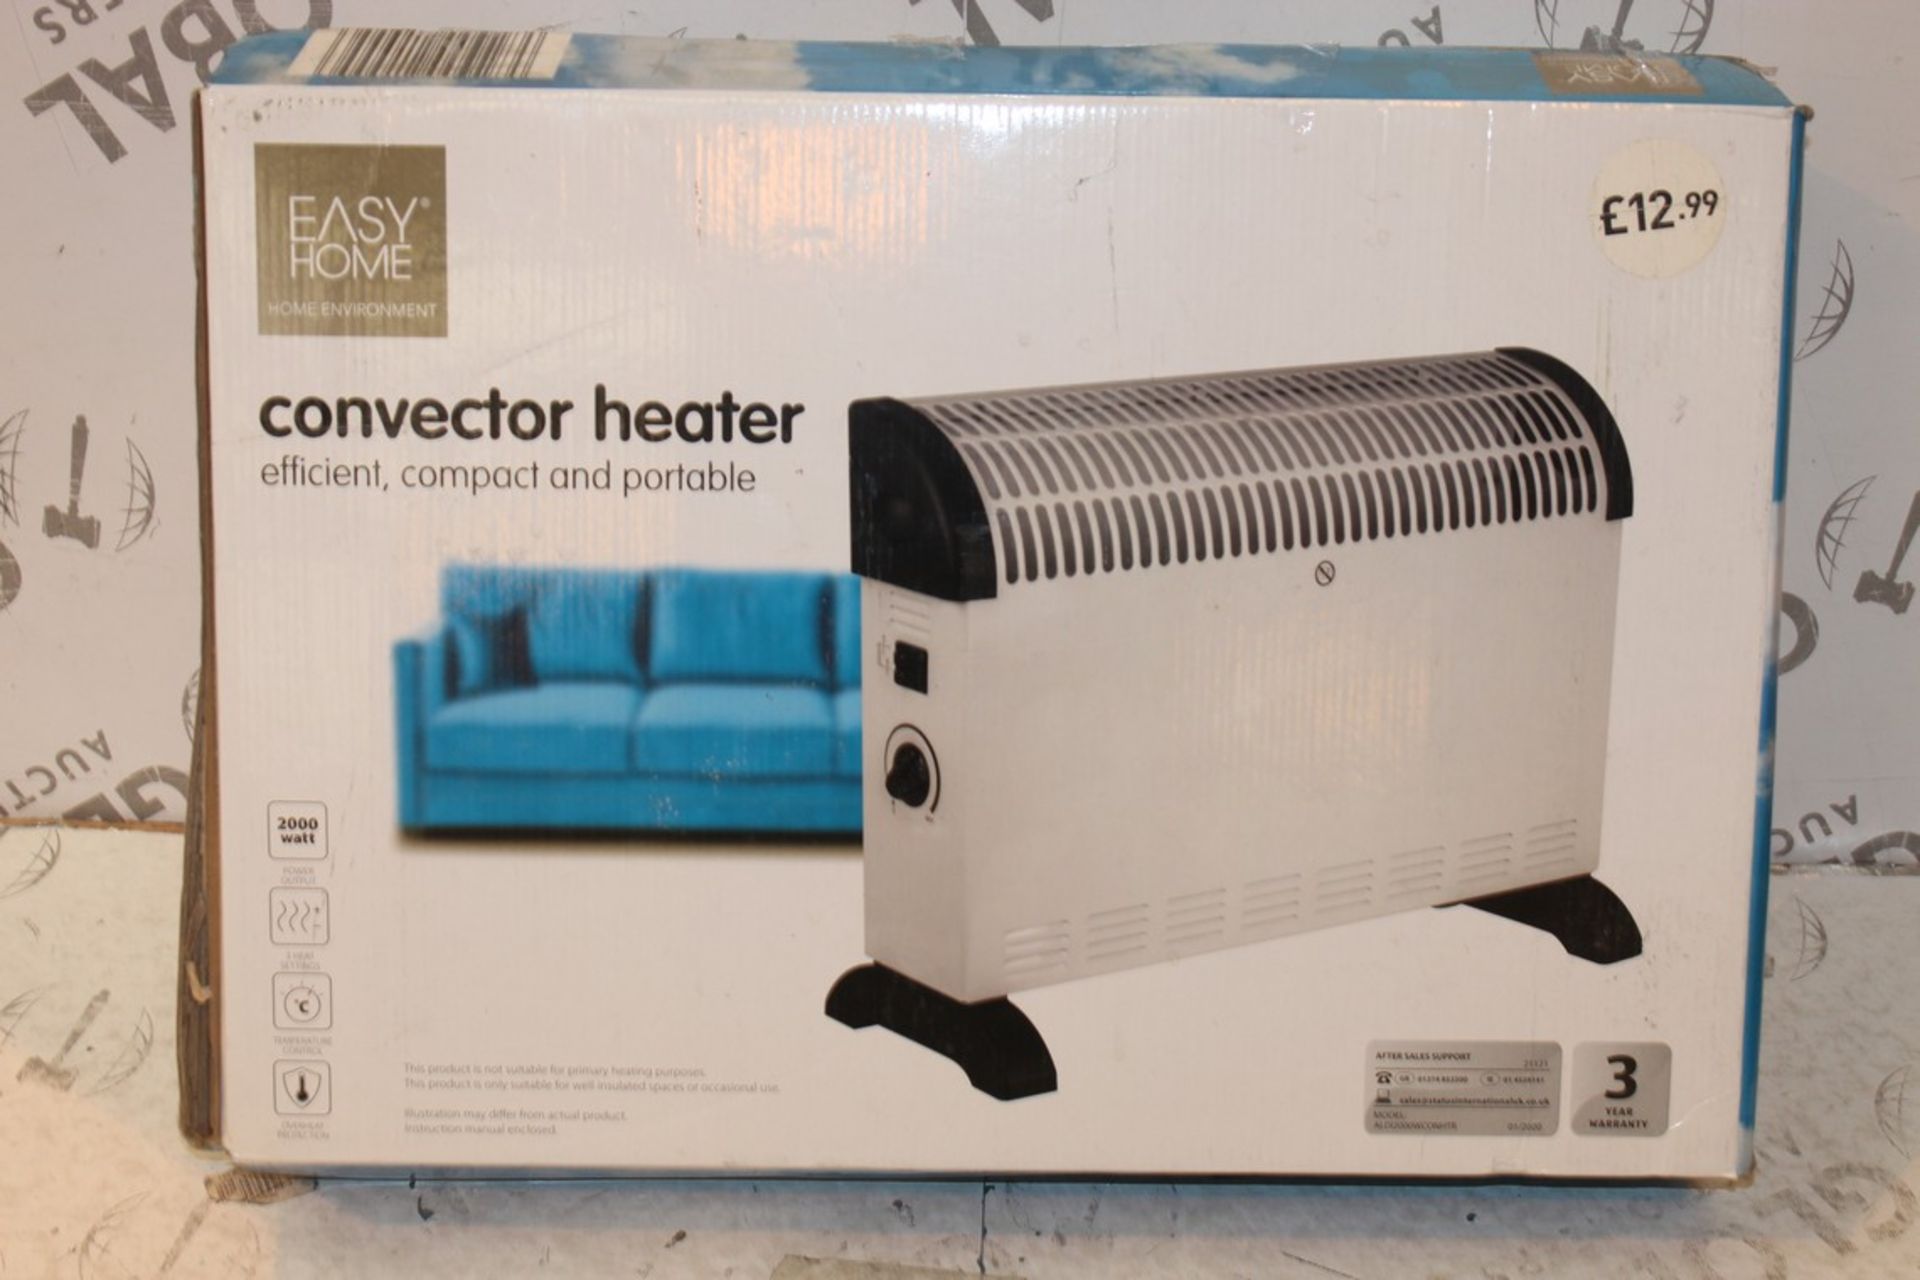 Lot to Contain 5 Easy Home Convector Heaters Combi